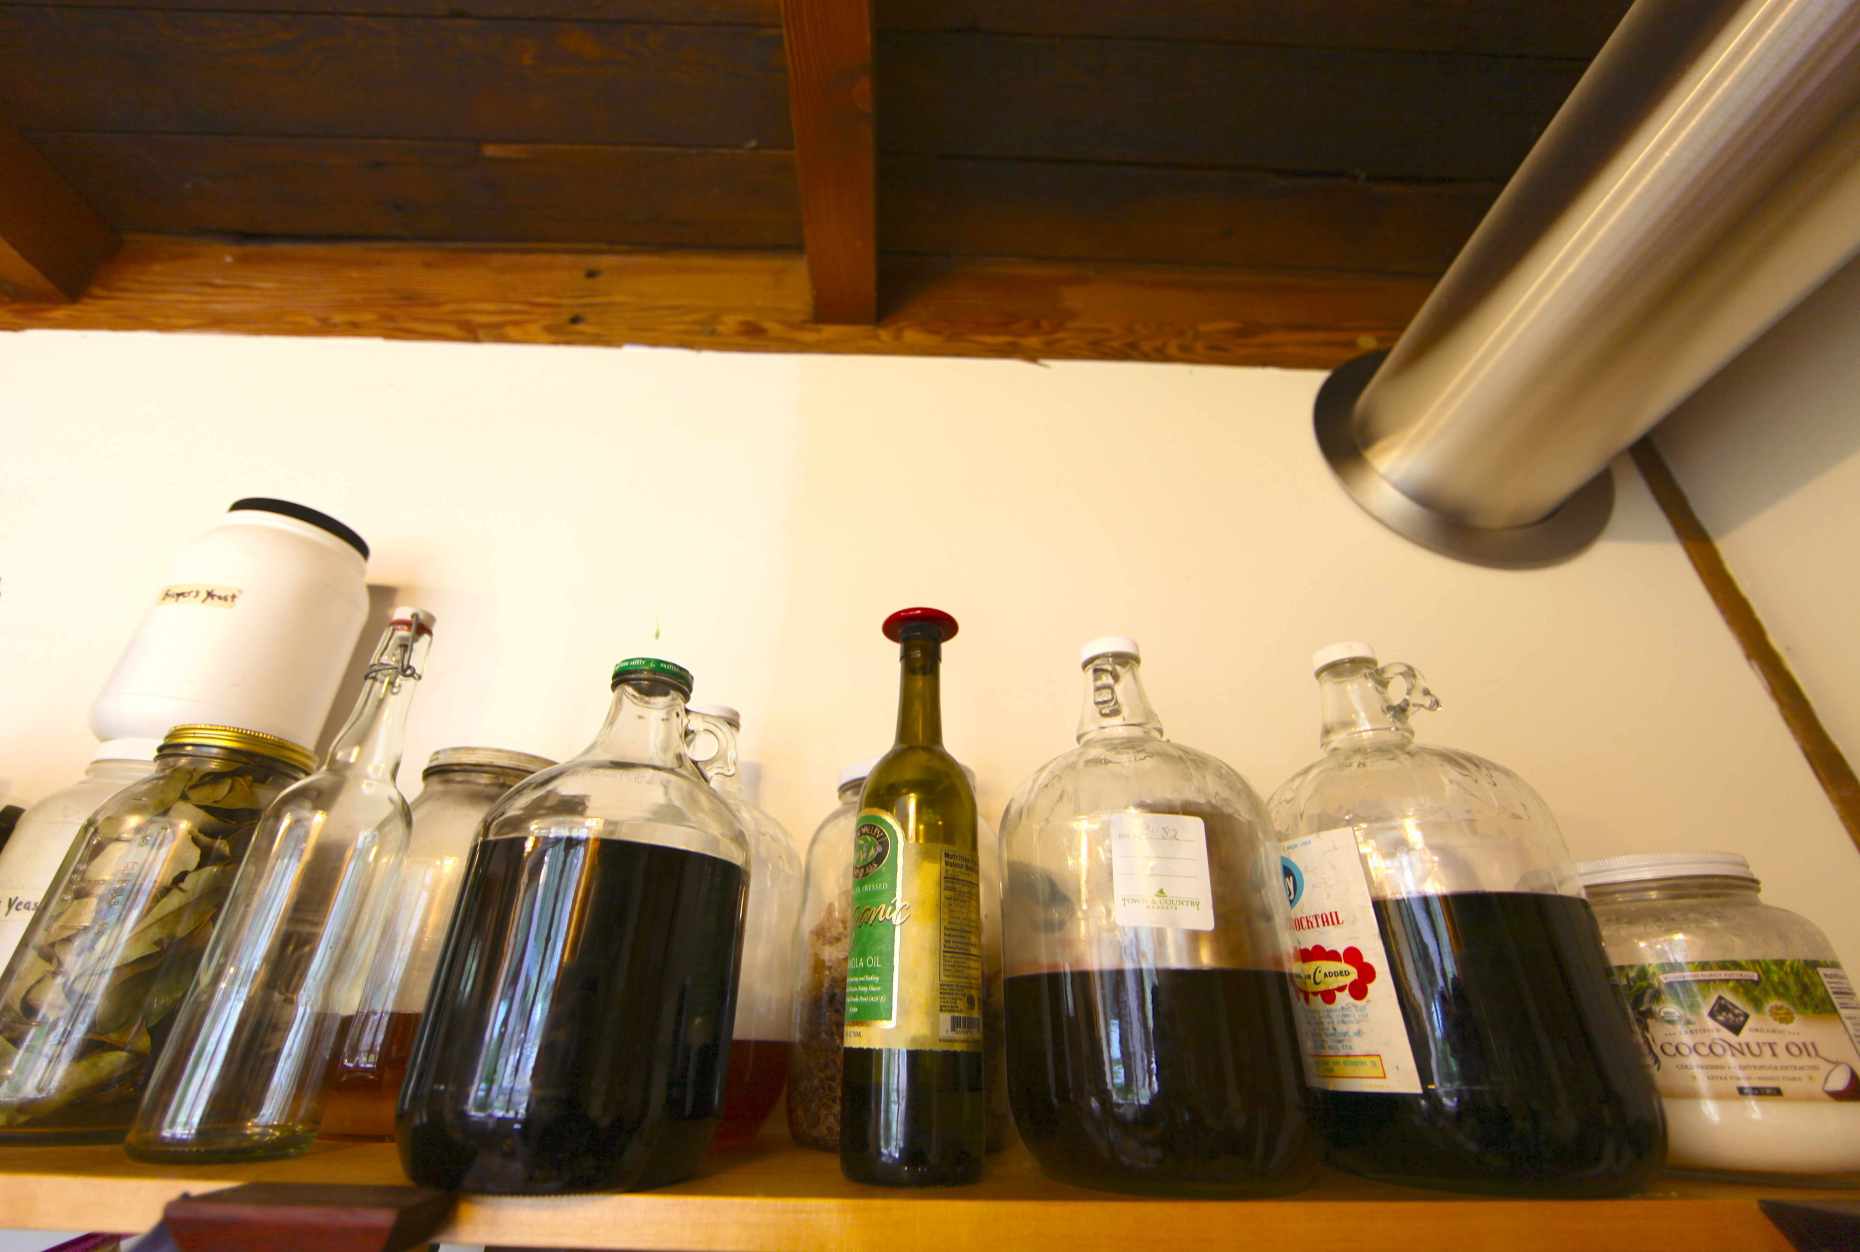 Plastic-Free Bulk Options: Oils & Maple Syrup Stored in Glass. Our Own Honey, too is Stored in Glass. Photo © Liesl Clark